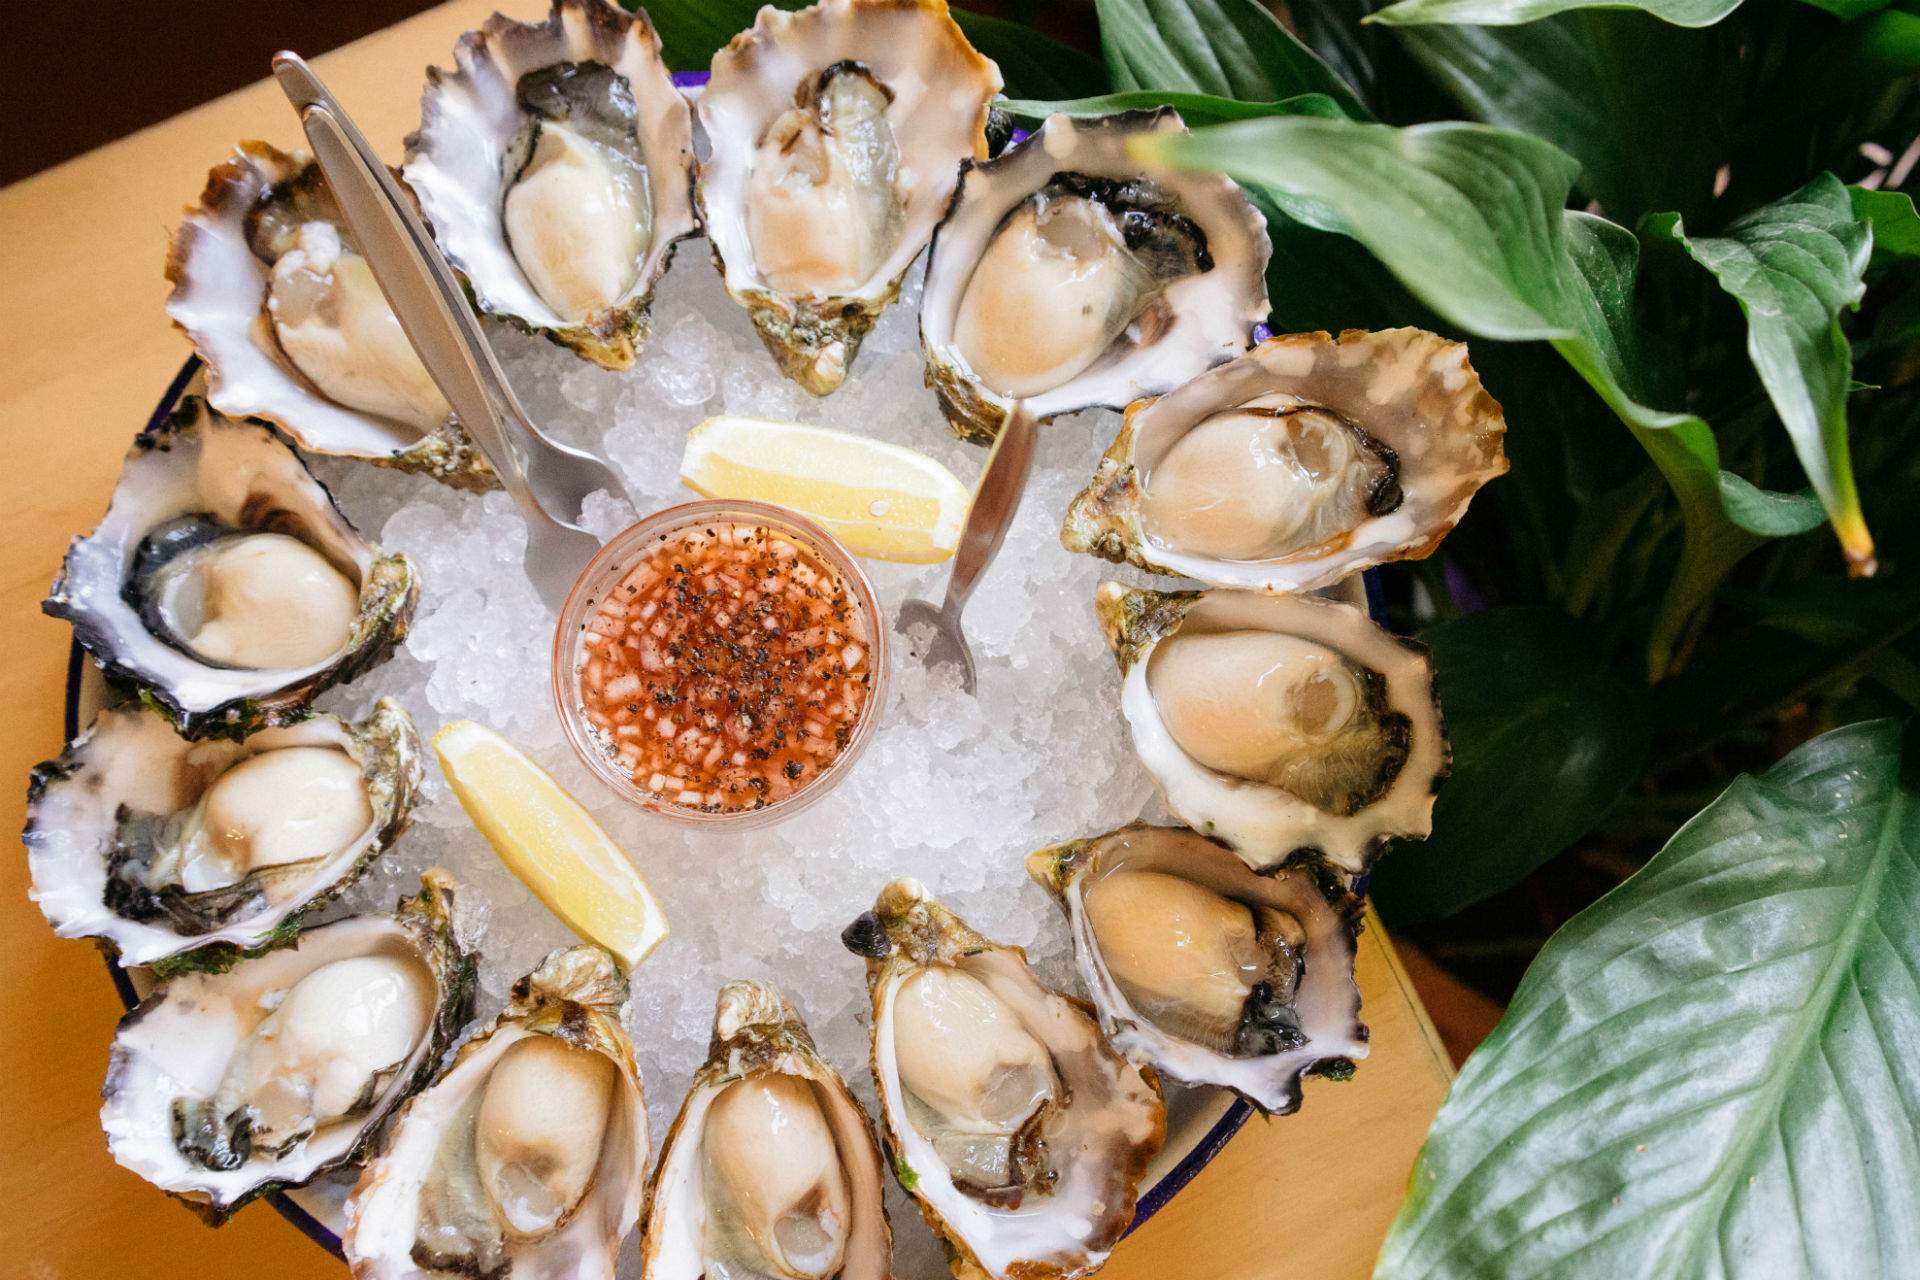 Shucks Is Brisbane's Decadent New Oyster Bar Overlooking the Manly Marina